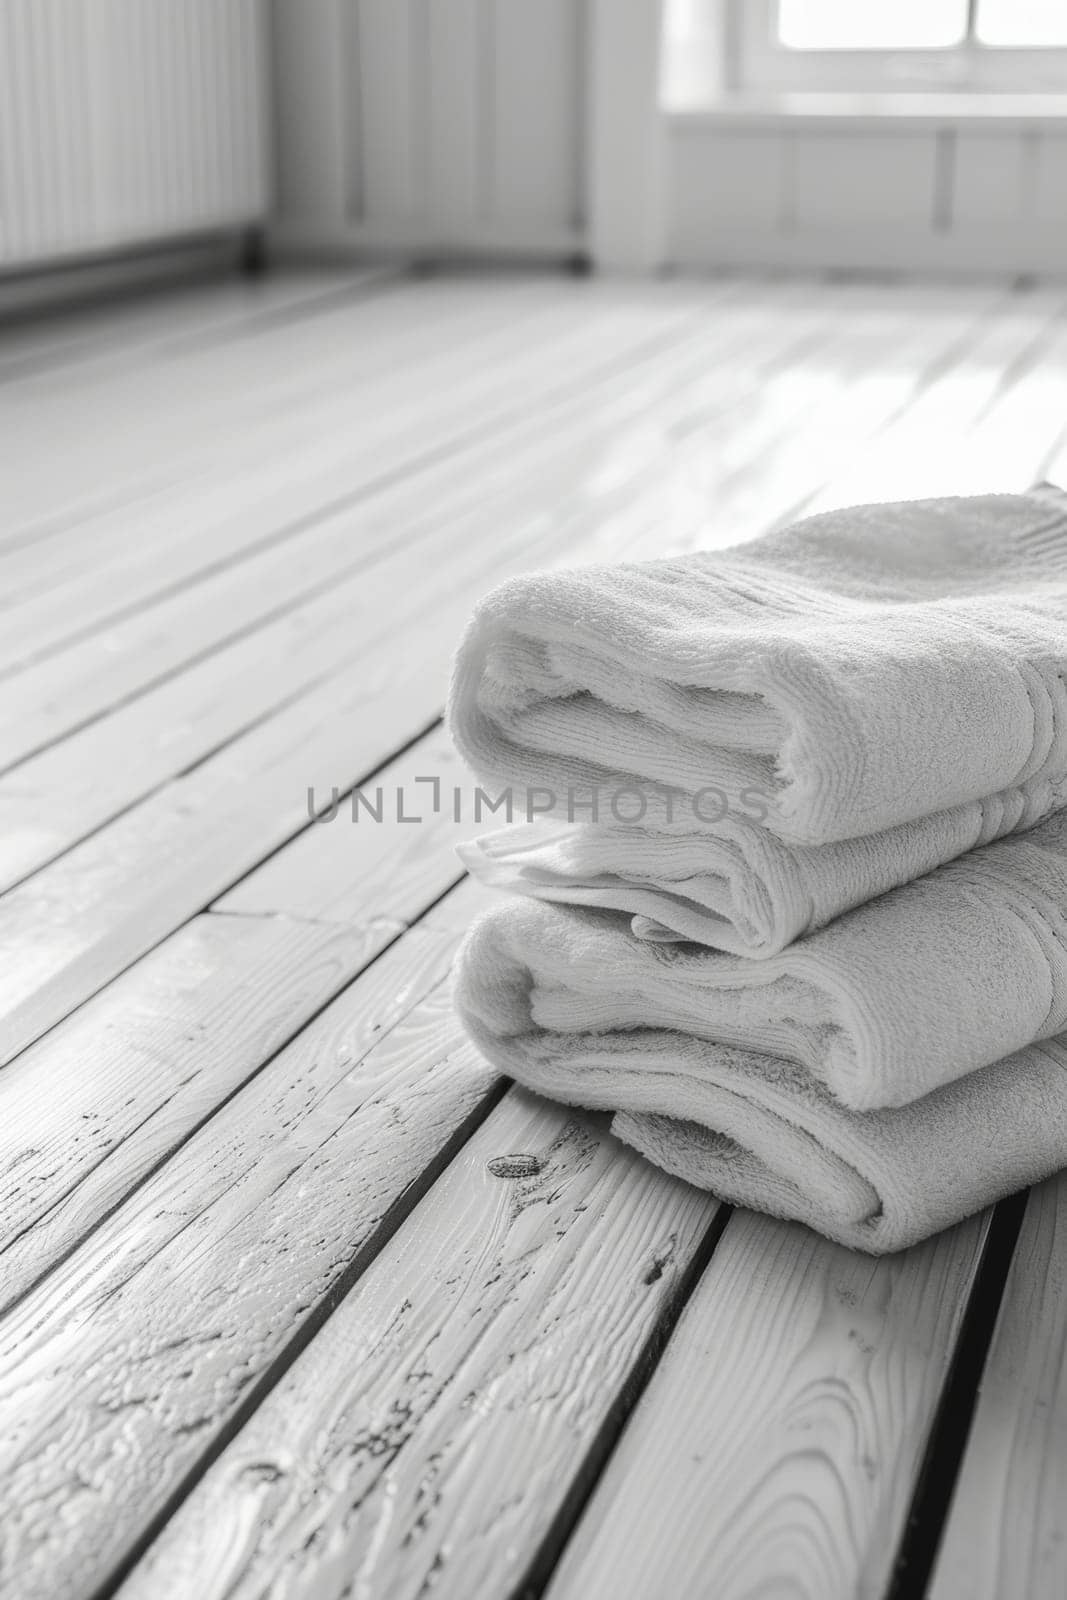 A stack of white towels lies on a wooden surface.